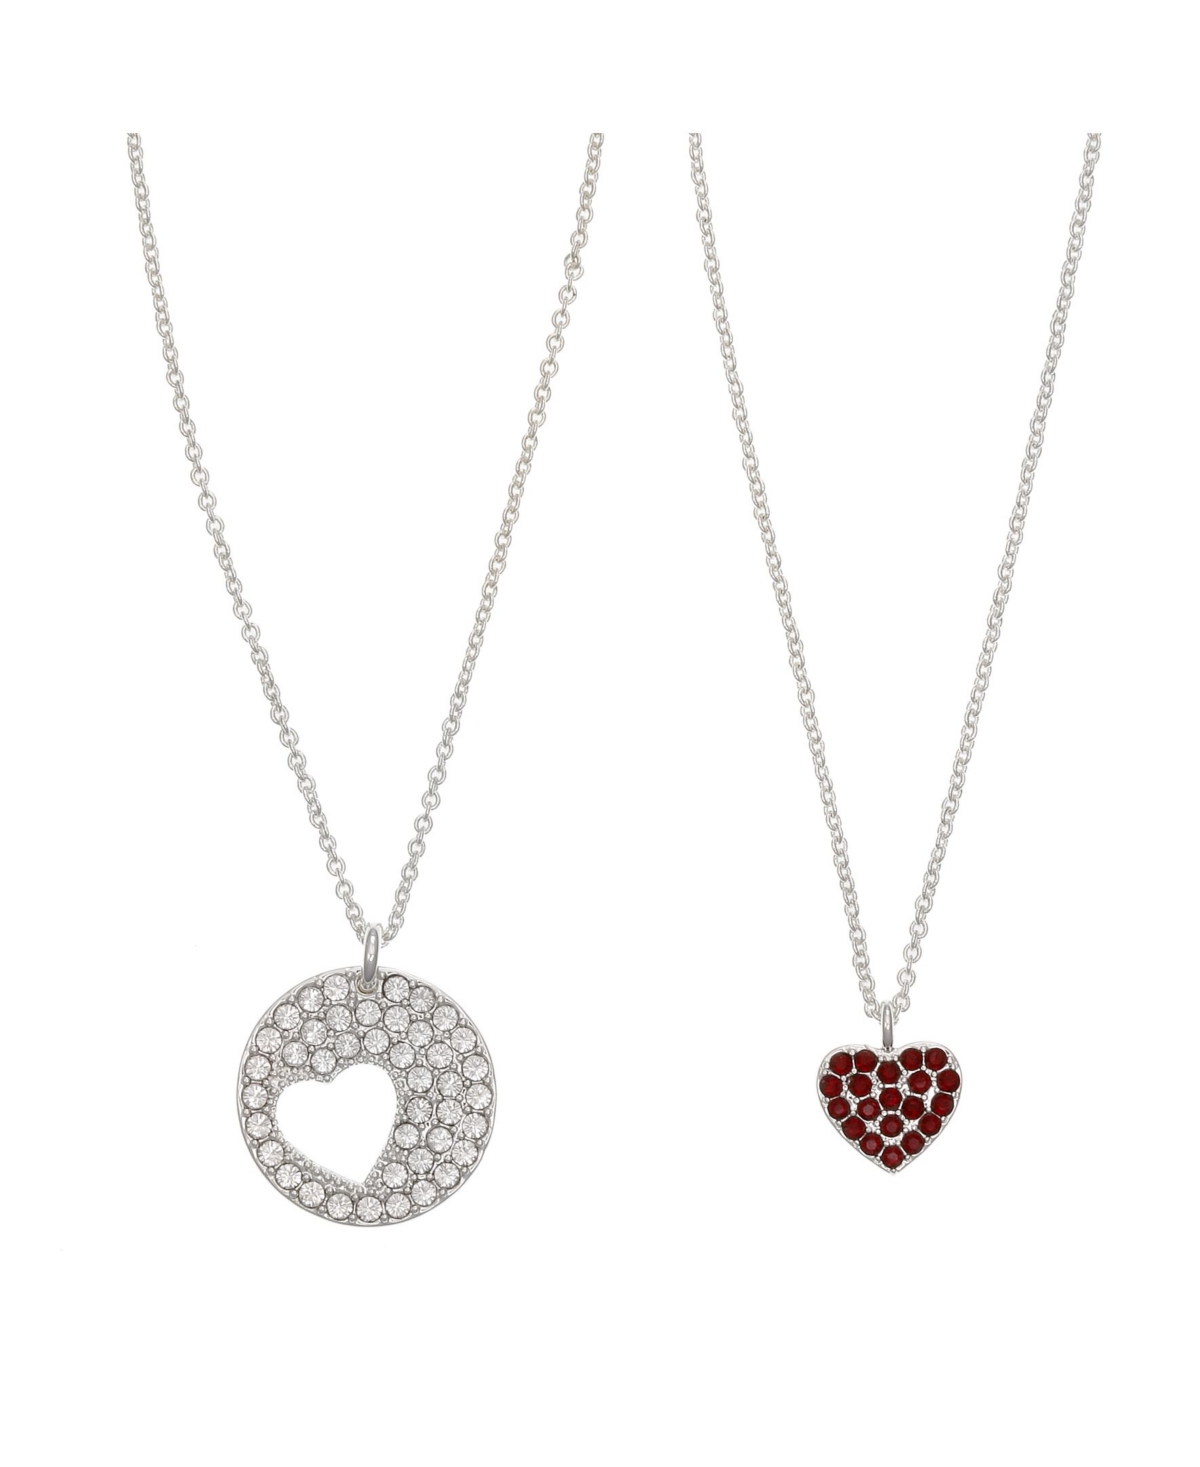 Women's Heart Pendant with Cubic Zirconia Stone Accents Necklace Set, 2 Piece - Red